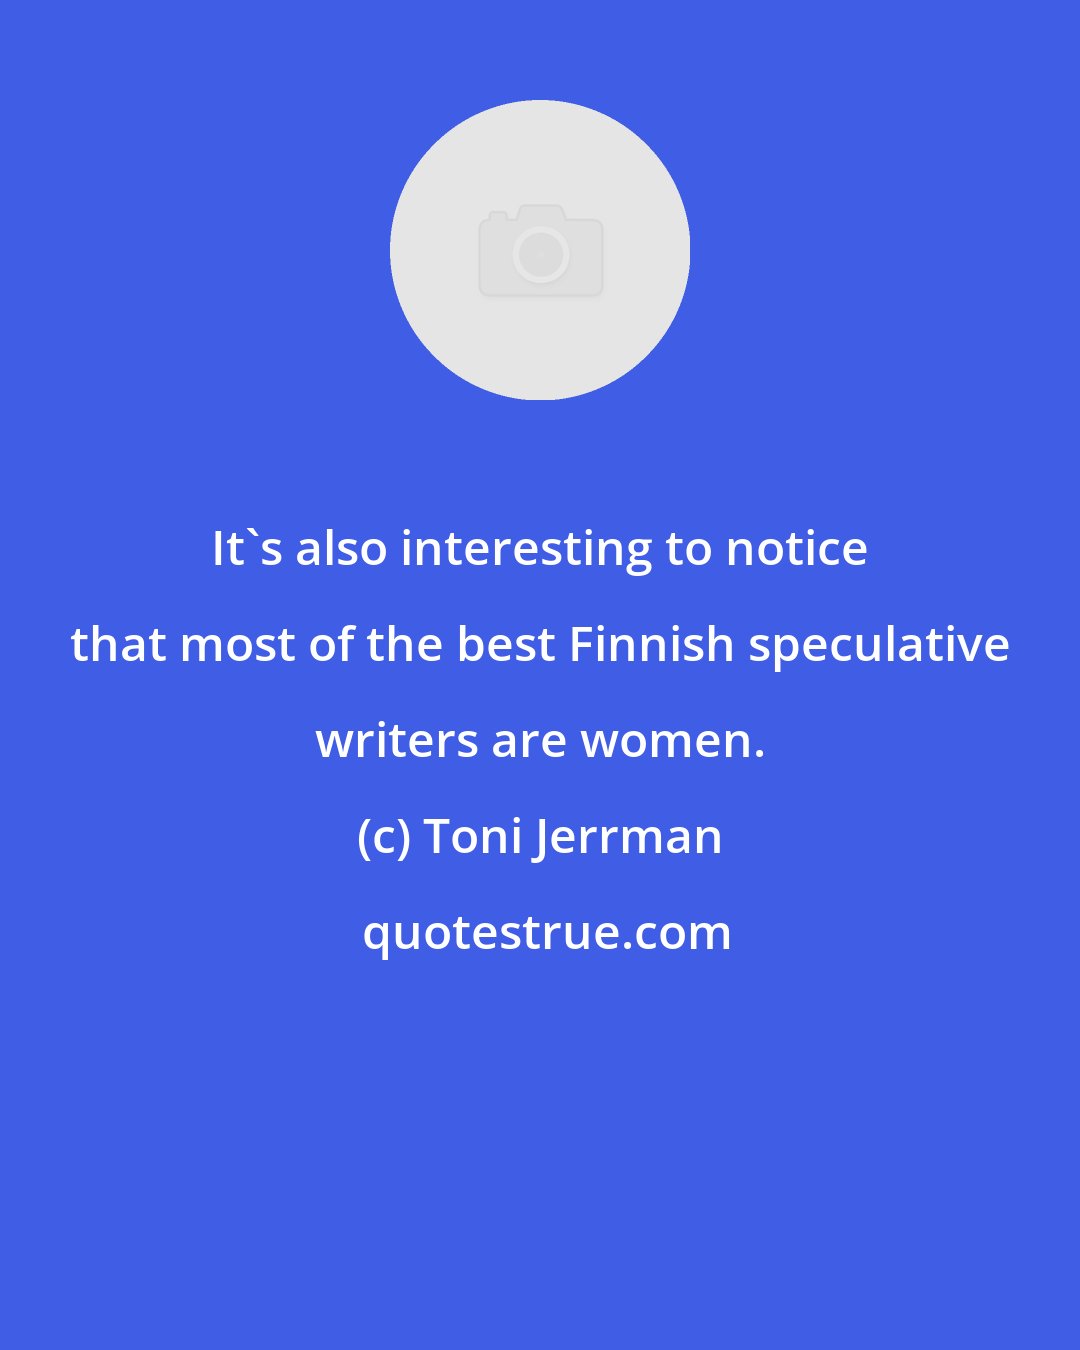 Toni Jerrman: It's also interesting to notice that most of the best Finnish speculative writers are women.